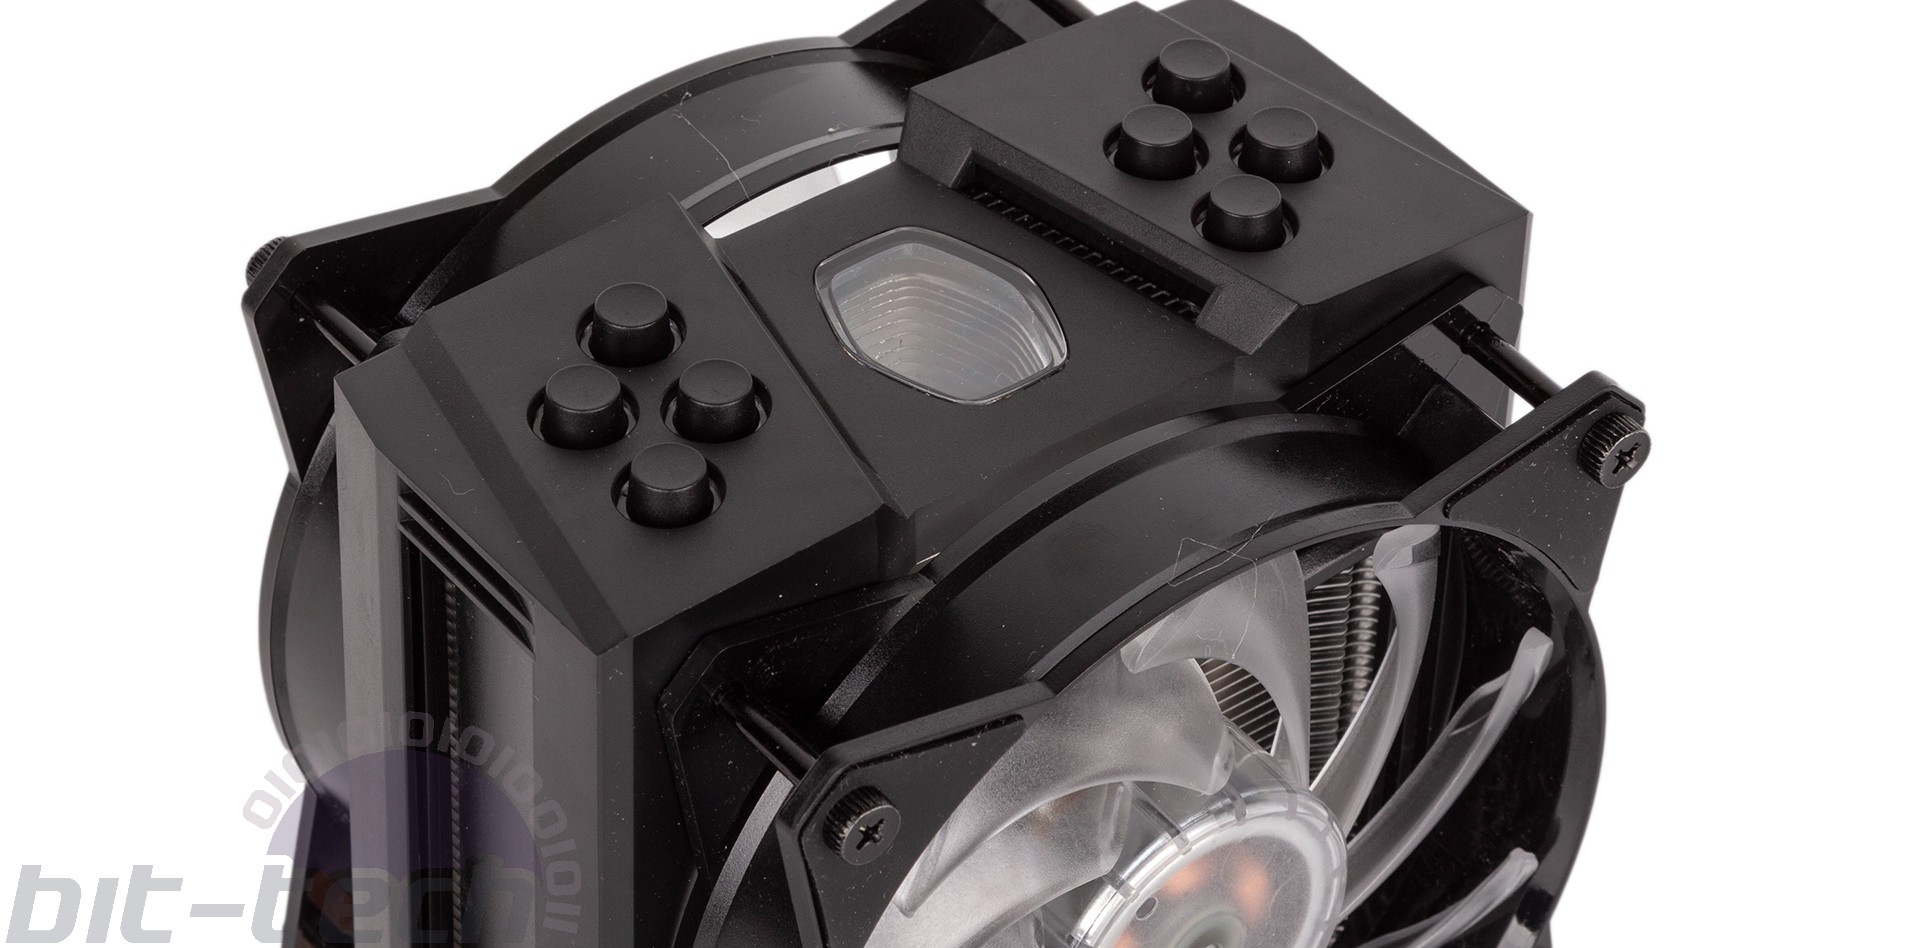 Cooler Master MasterAir MA410M Review: (Air) Wolf In Wolves' Clothing